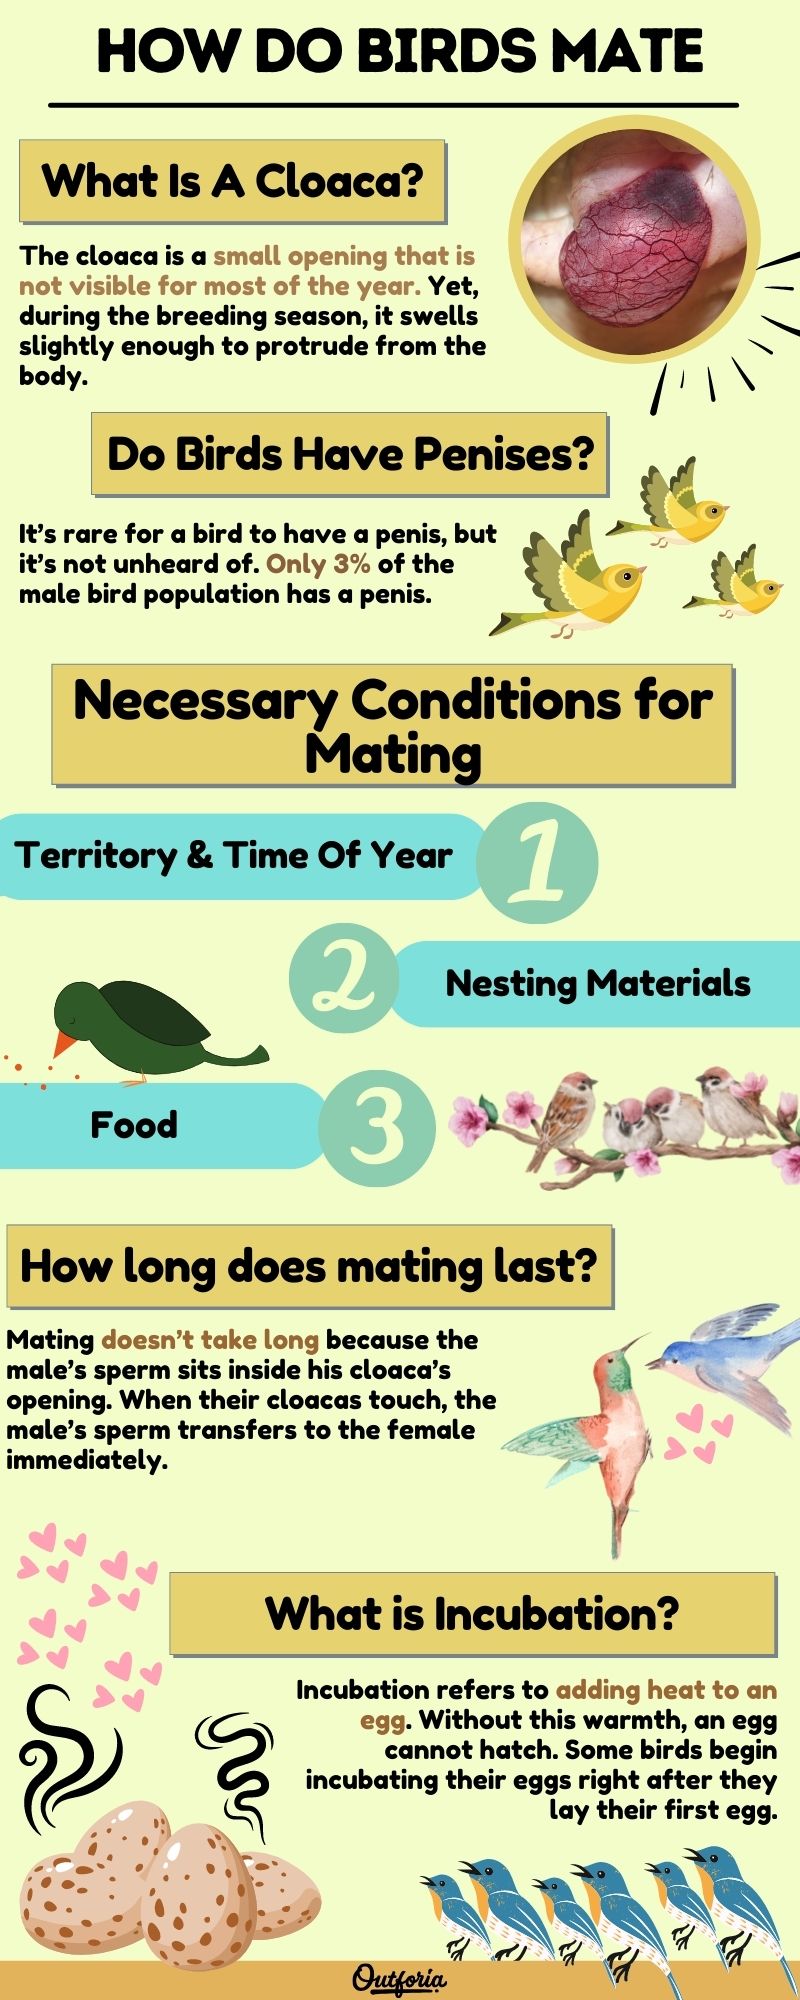 Chart of how do birds mate including facts, photos, and more